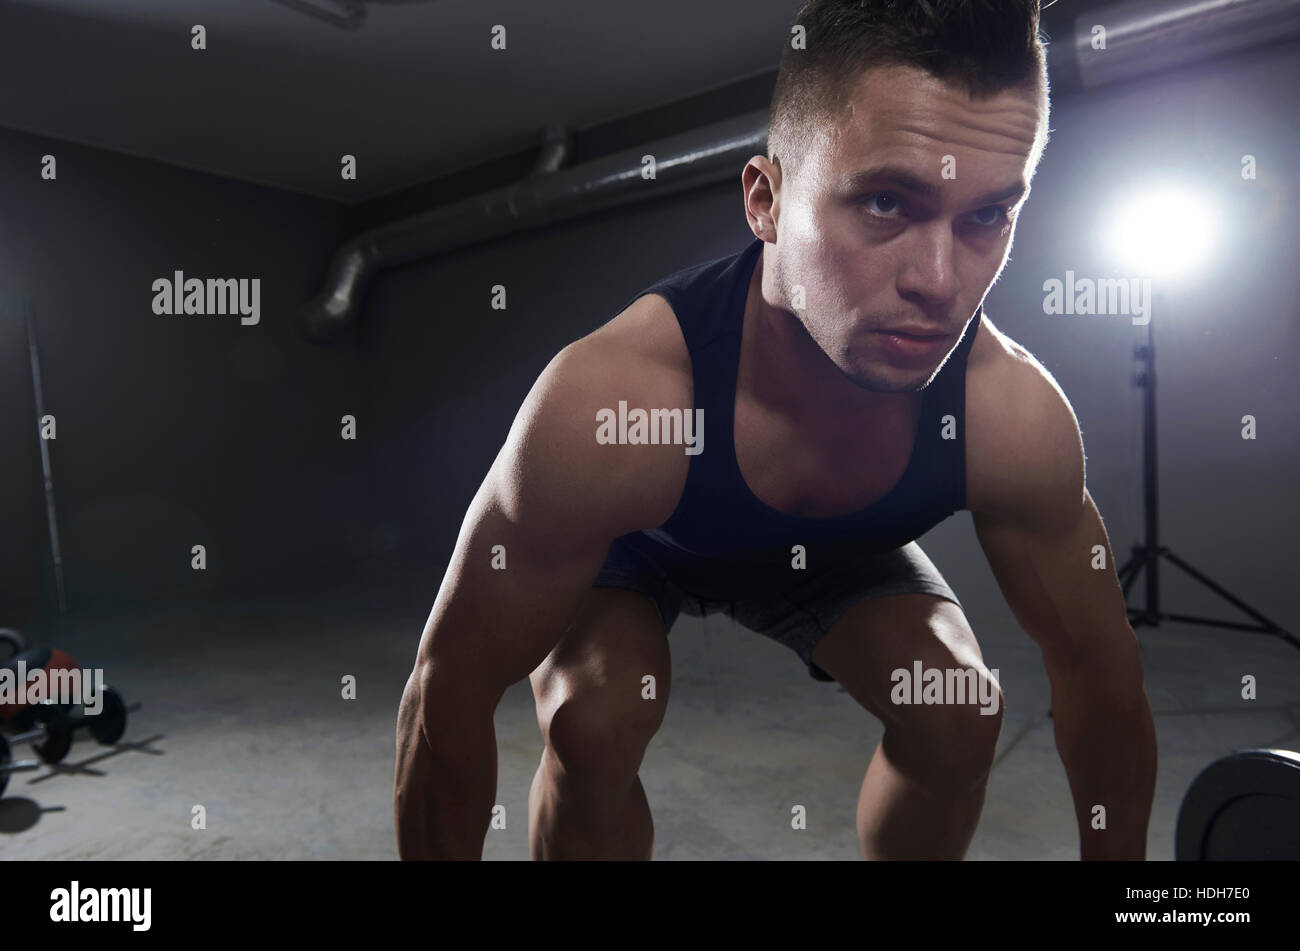 Athlete man about to lift heavy weights Stock Photo